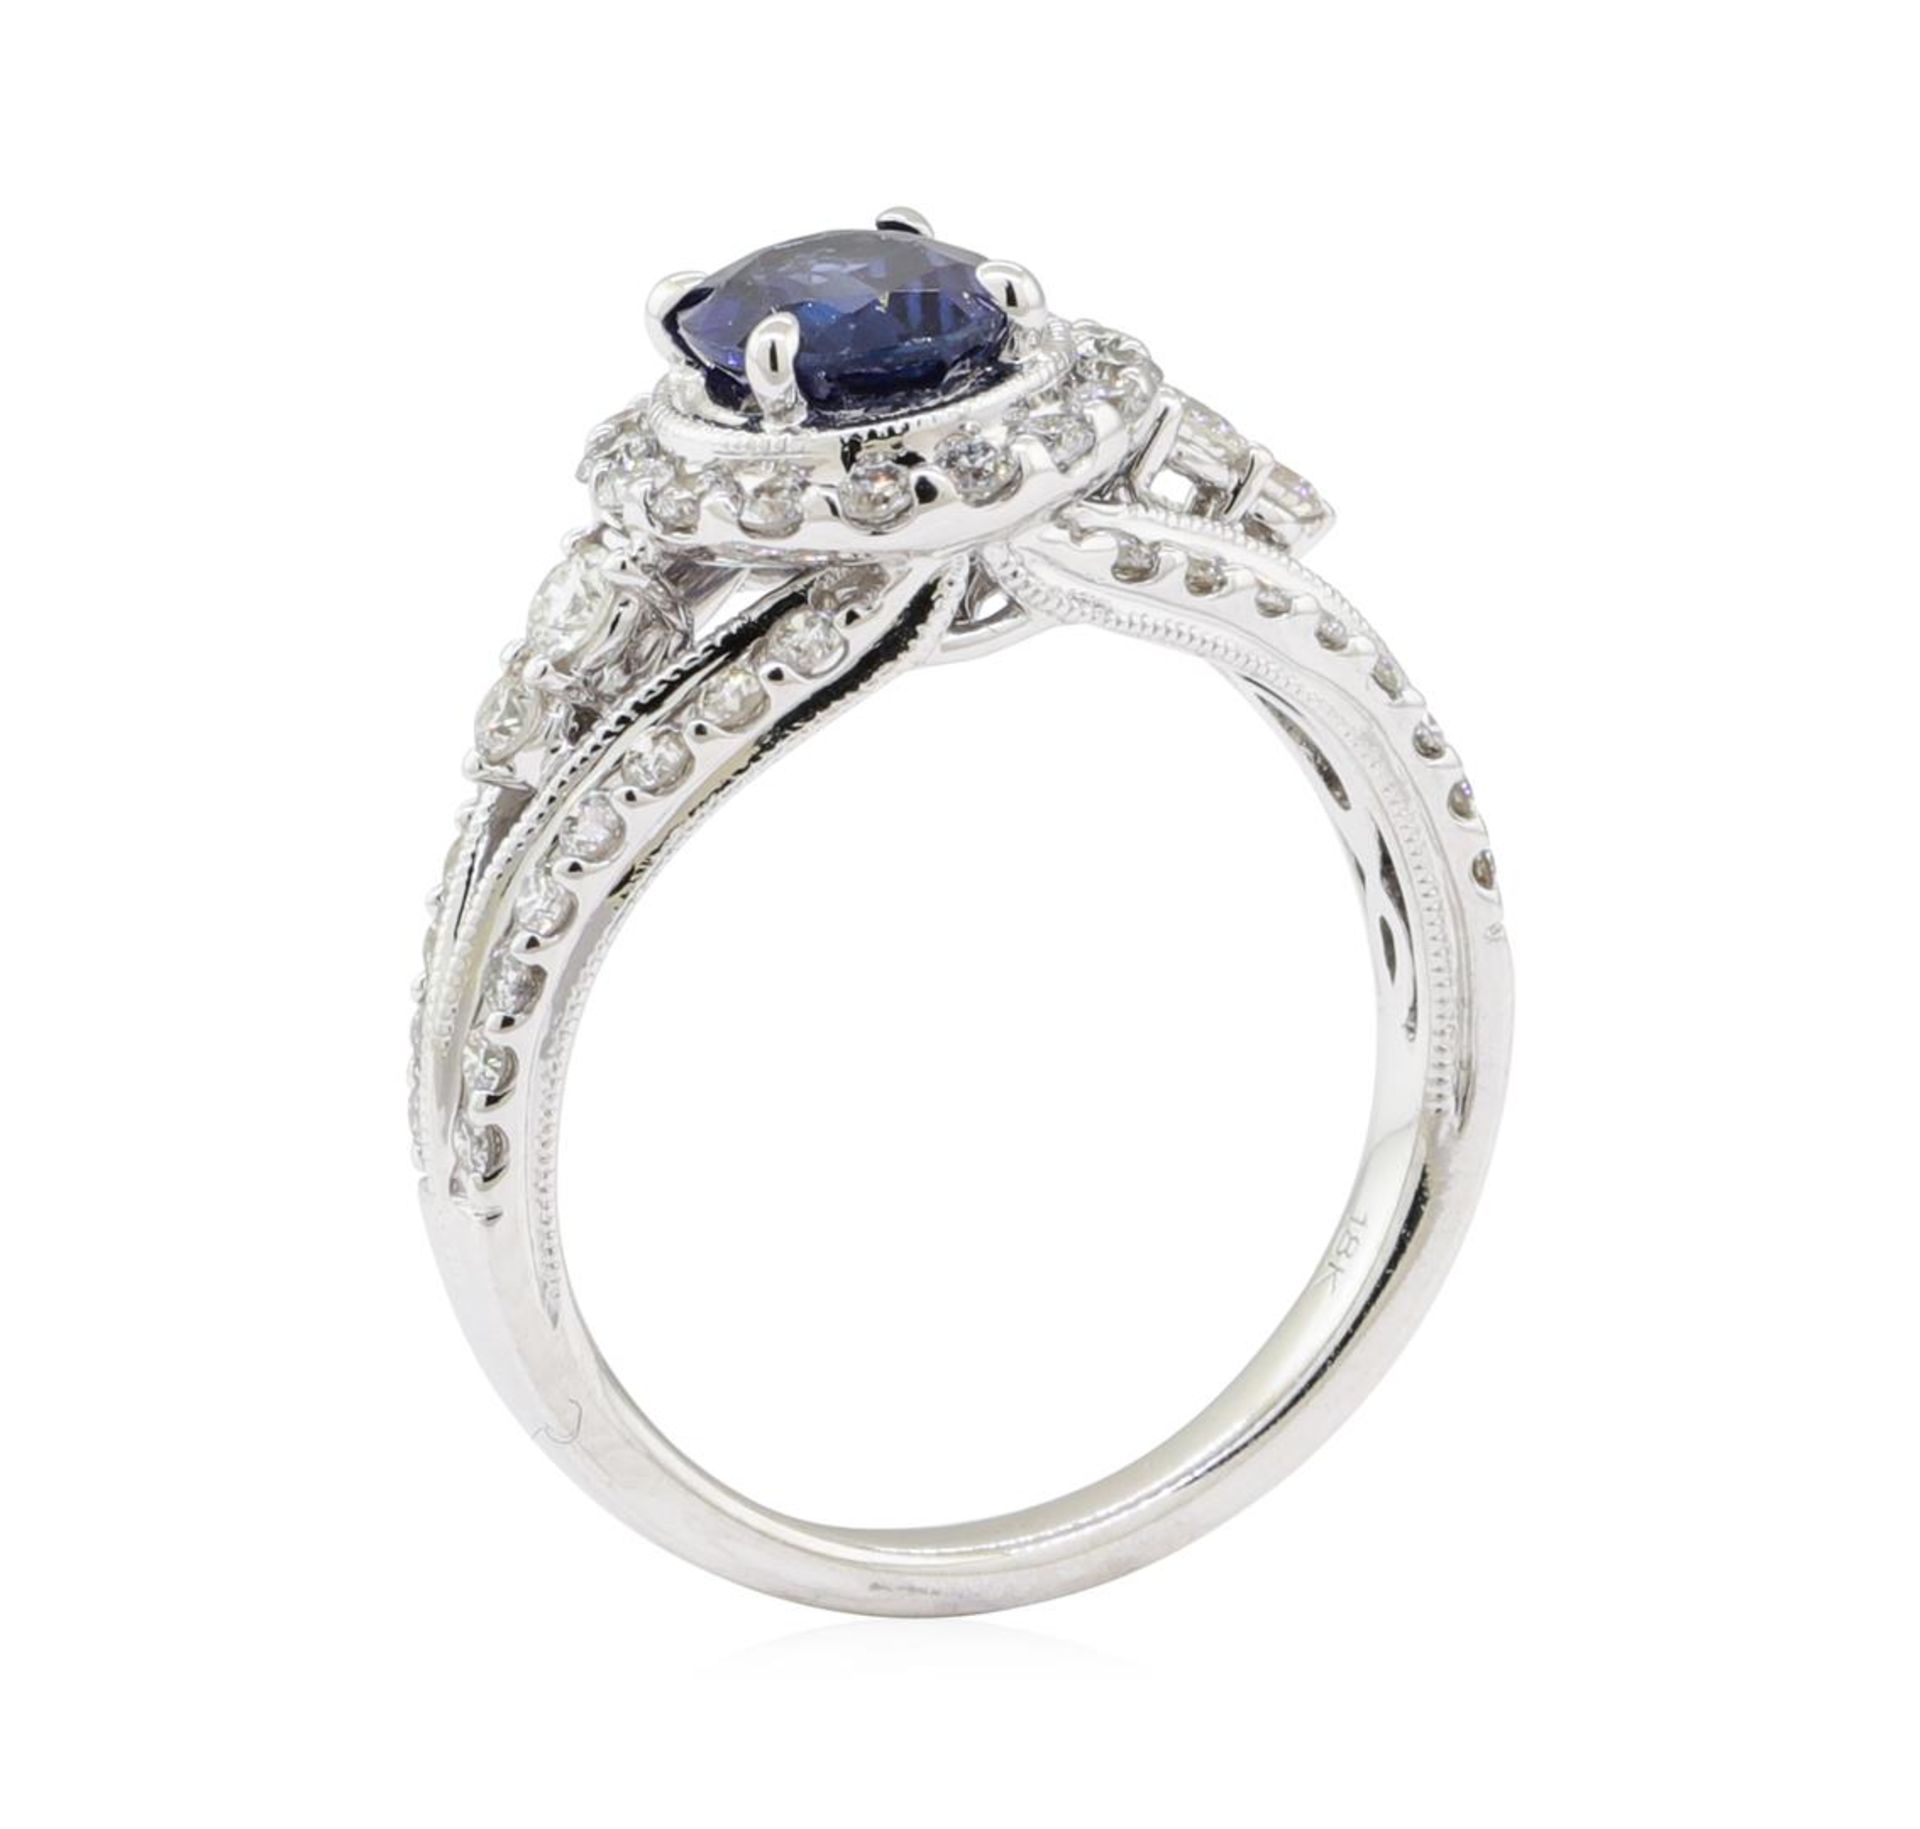 1.95 ctw Sapphire and Diamond Ring - 18KT White Gold - Image 4 of 5